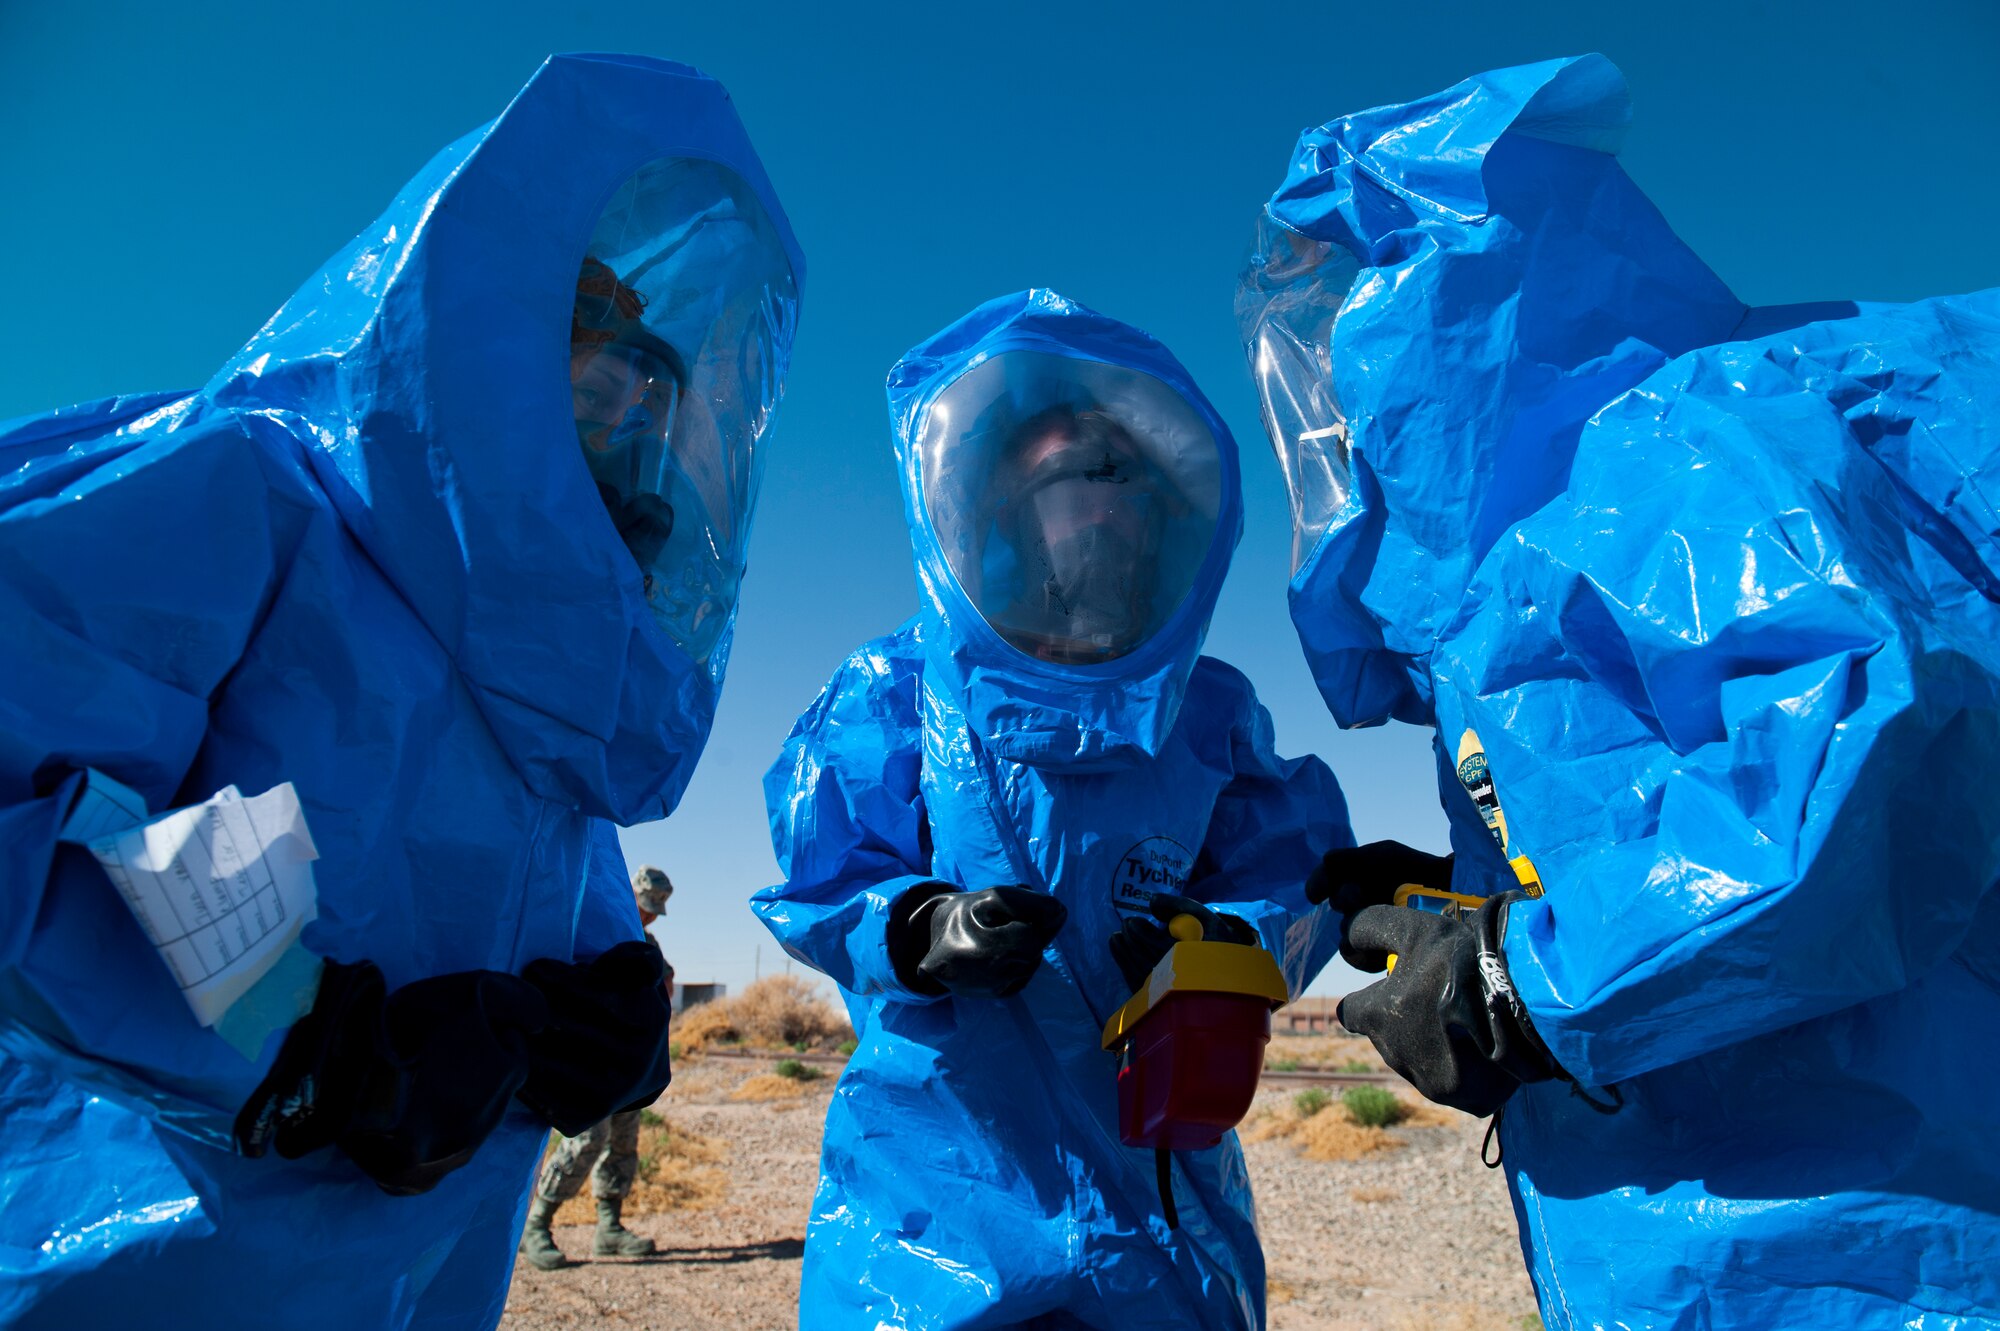 Airman 1st Class Lucas Montoya and Airman 1st Class Peyton Oesterrech, both 49th Civil Engineer Squadron bioenvironmental engineers, and Staff Sgt. Amber Green, 49th Civil Engineer Squadron emergency management, huddle together to decide how they will approach a hazmat training scenario at Holloman Air Force Base, N.M., April 18. Airmen in bioenvironmental and emergency management undergo integrated base emergency response capability training to keep their skills sharp at all times. (U.S. Air Force photo by Airman 1st Class Daniel E. Liddicoet/Released)